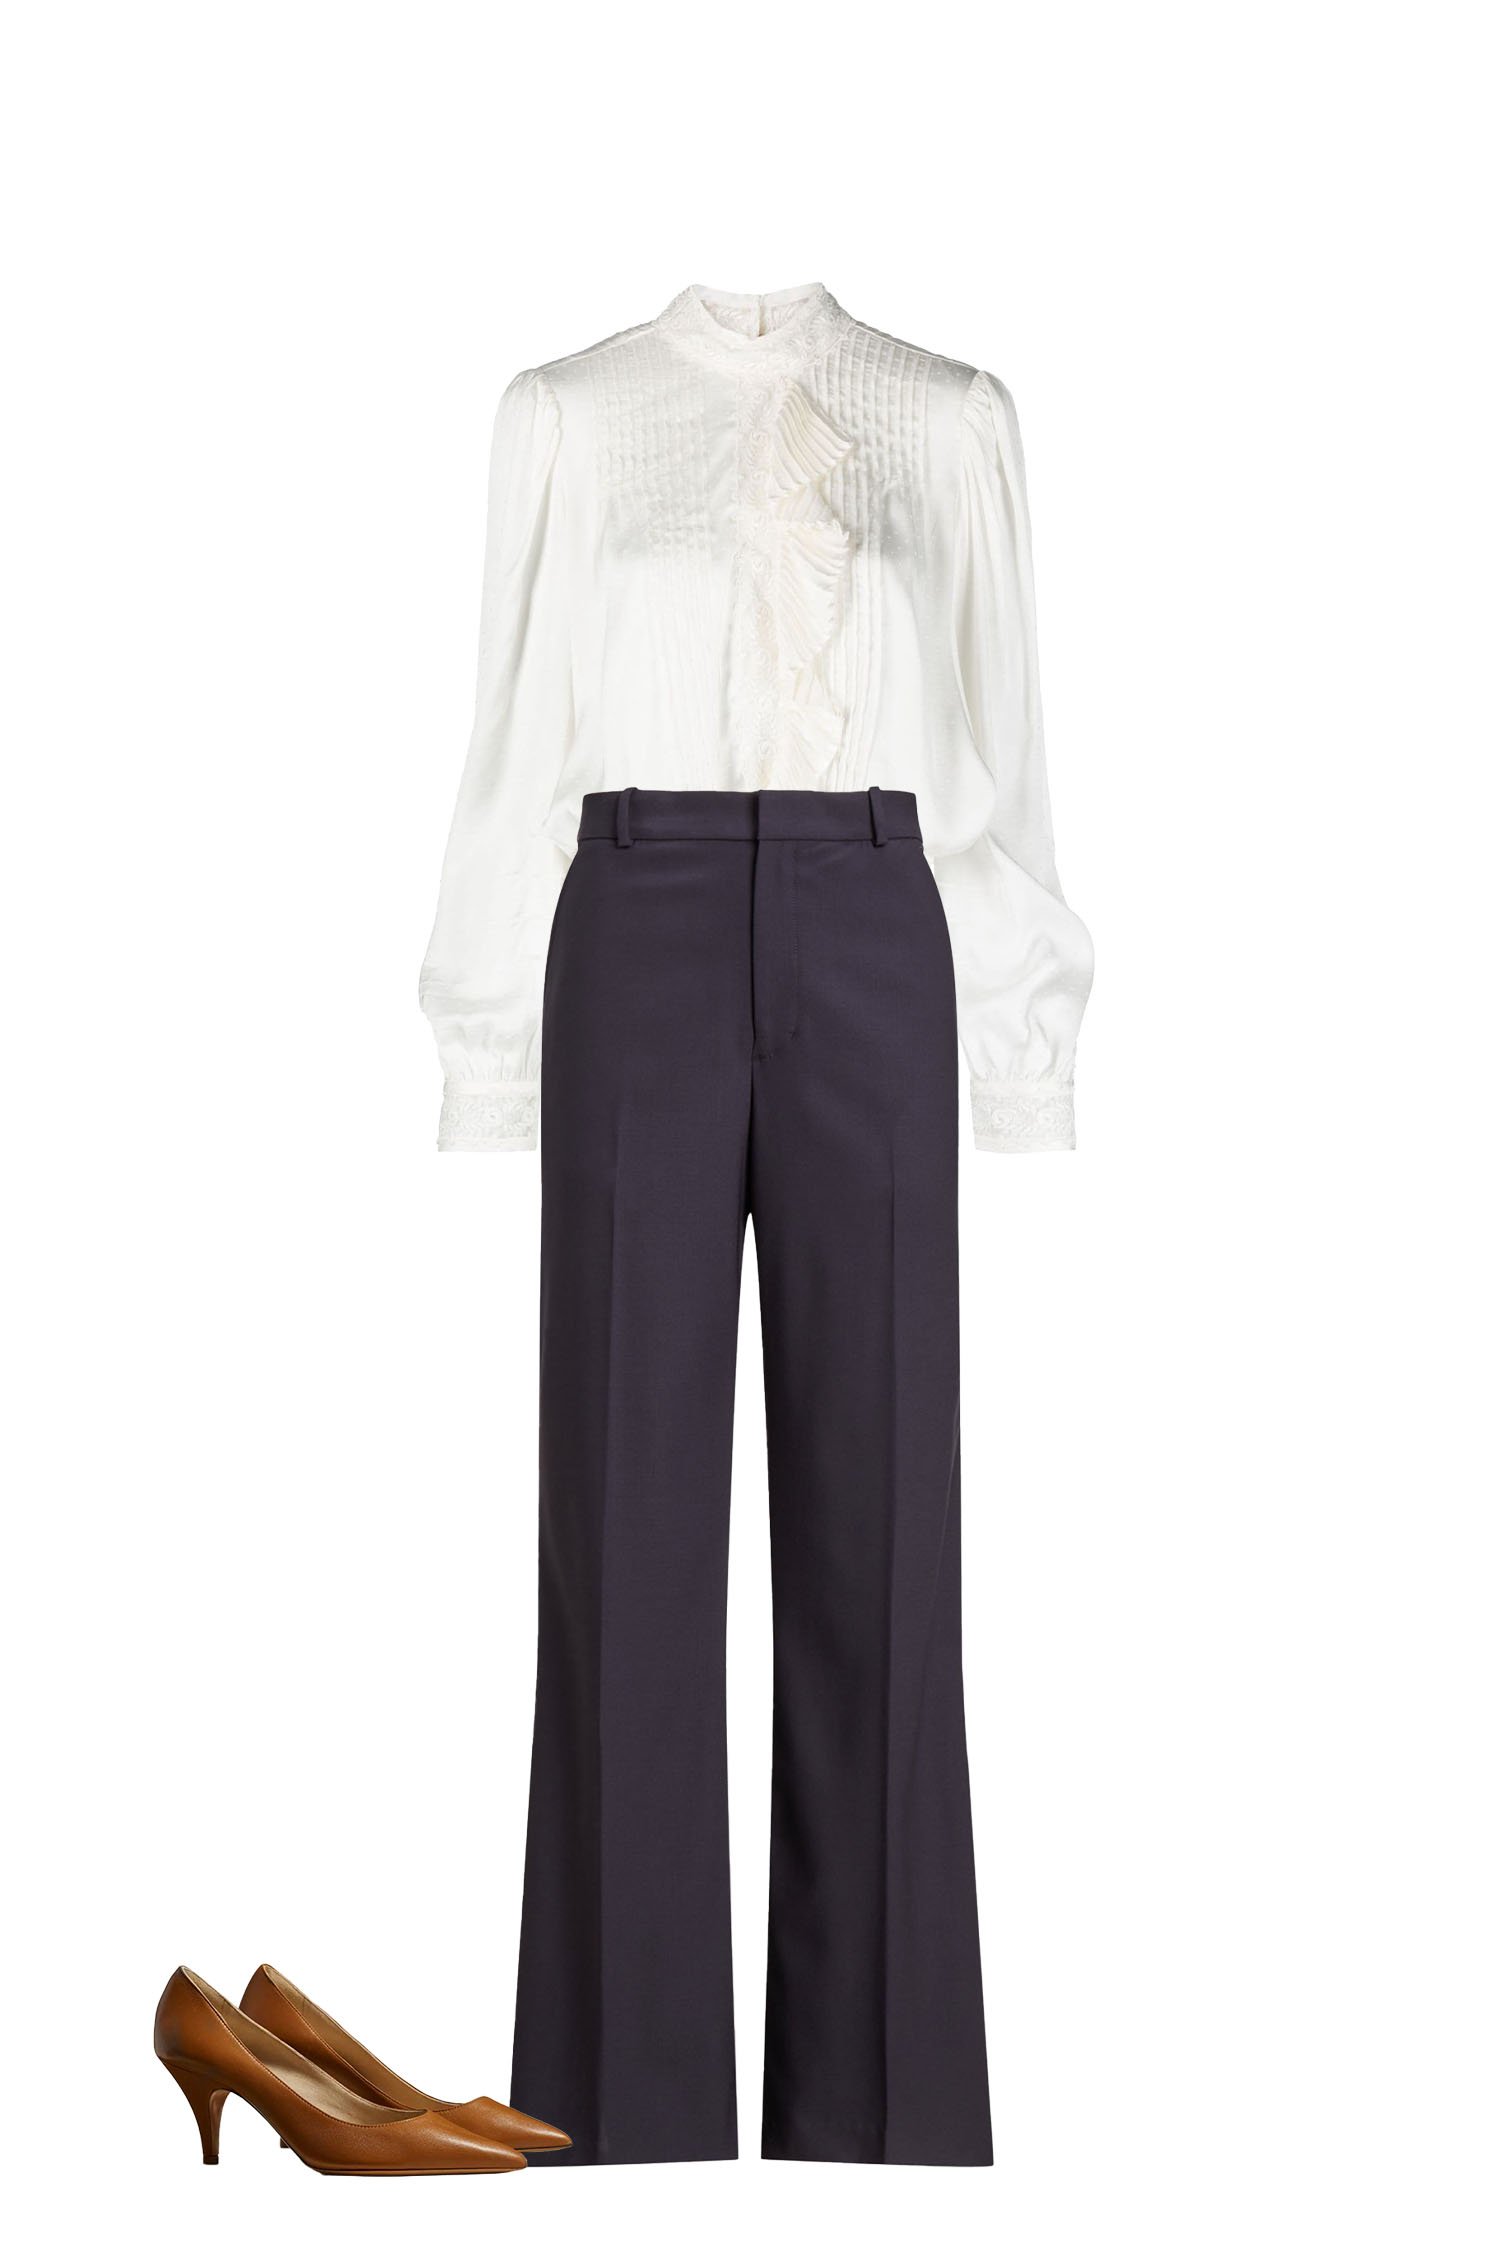 Spring Office Outfit - High-Waisted Wide-Leg Navy Pants, White Ruffle and Lace Blouse, Brown Pumps